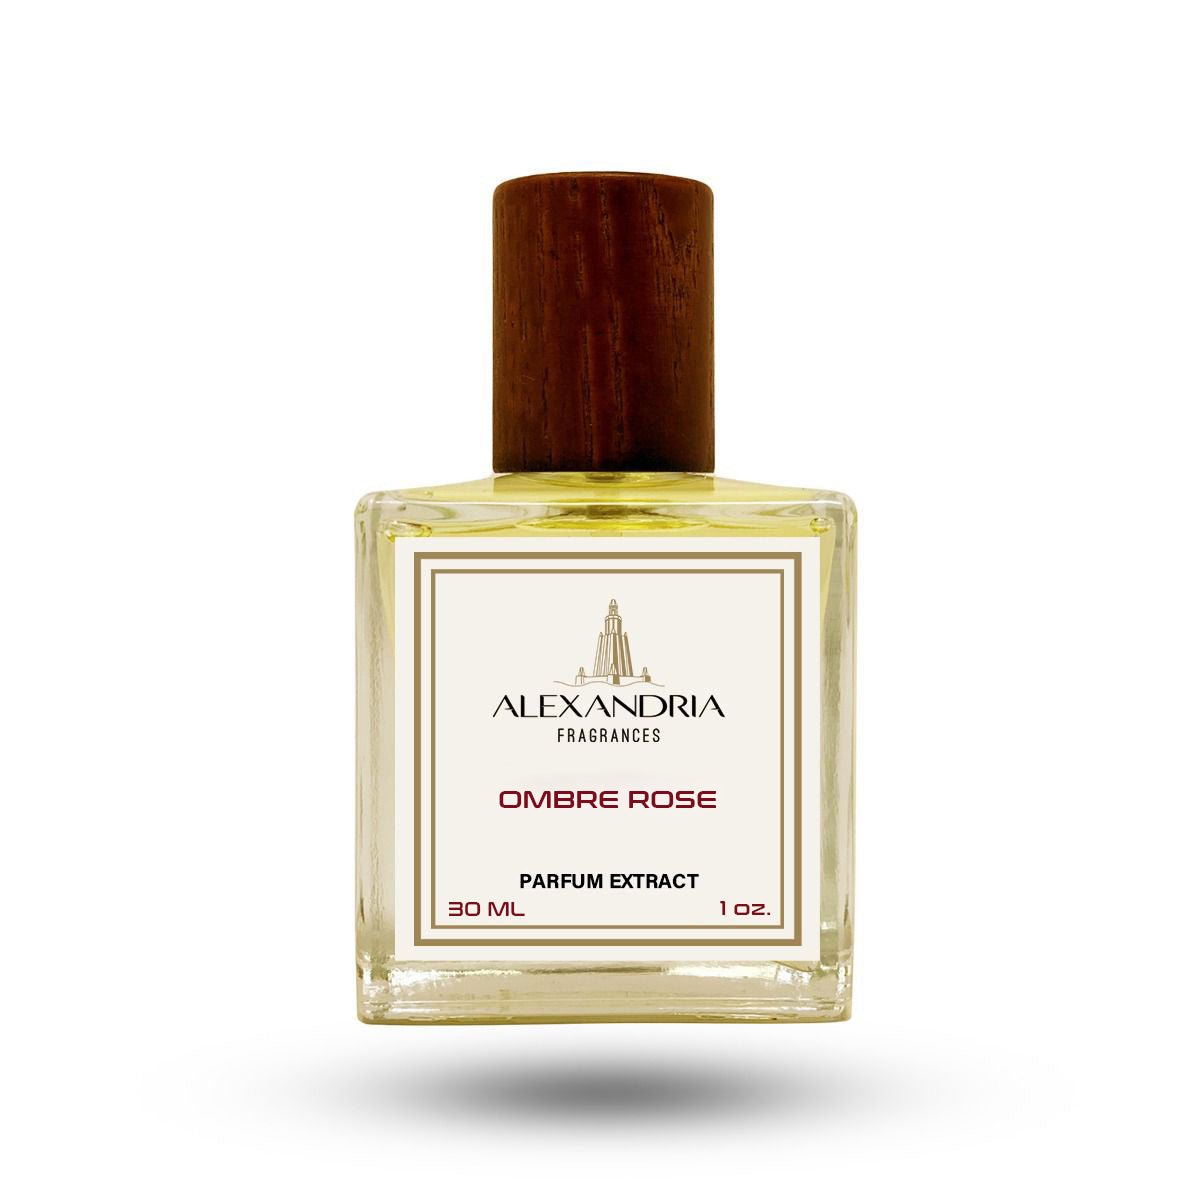 House Of El Sultan - Ombre De Louis By Privezarah Inspired By Louis Vuitton  Ombre Nomade Ombre De Louis is a dark and juicy red rose with a woody  backbone. Excellent quality